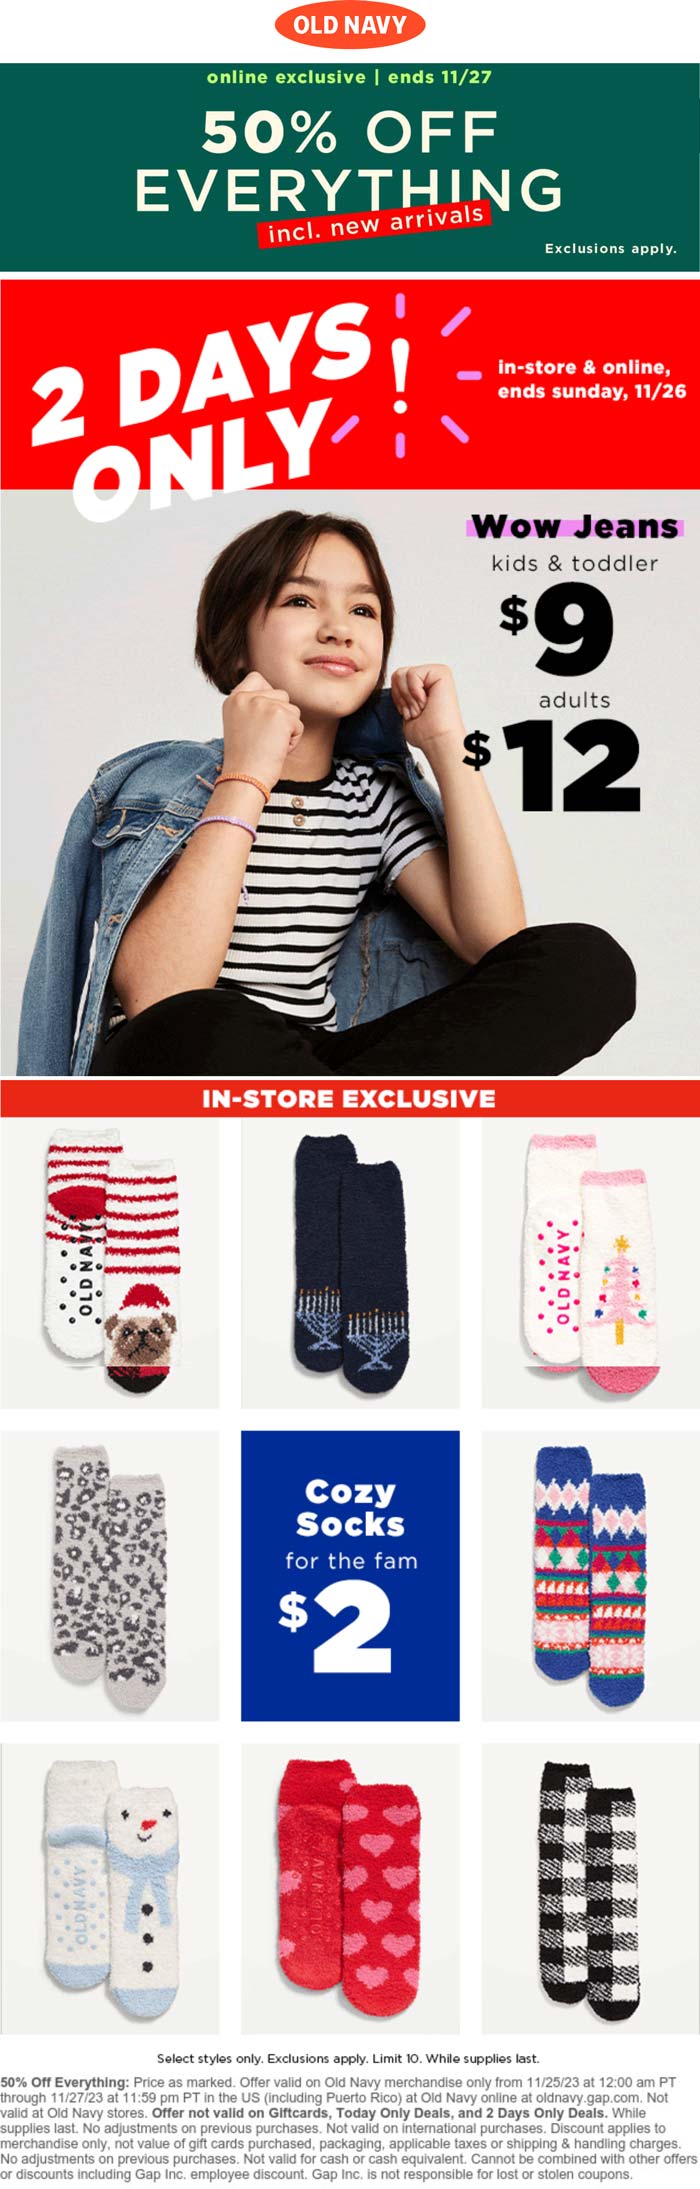 Old Navy stores Coupon  50% off everything at Old Navy #oldnavy 